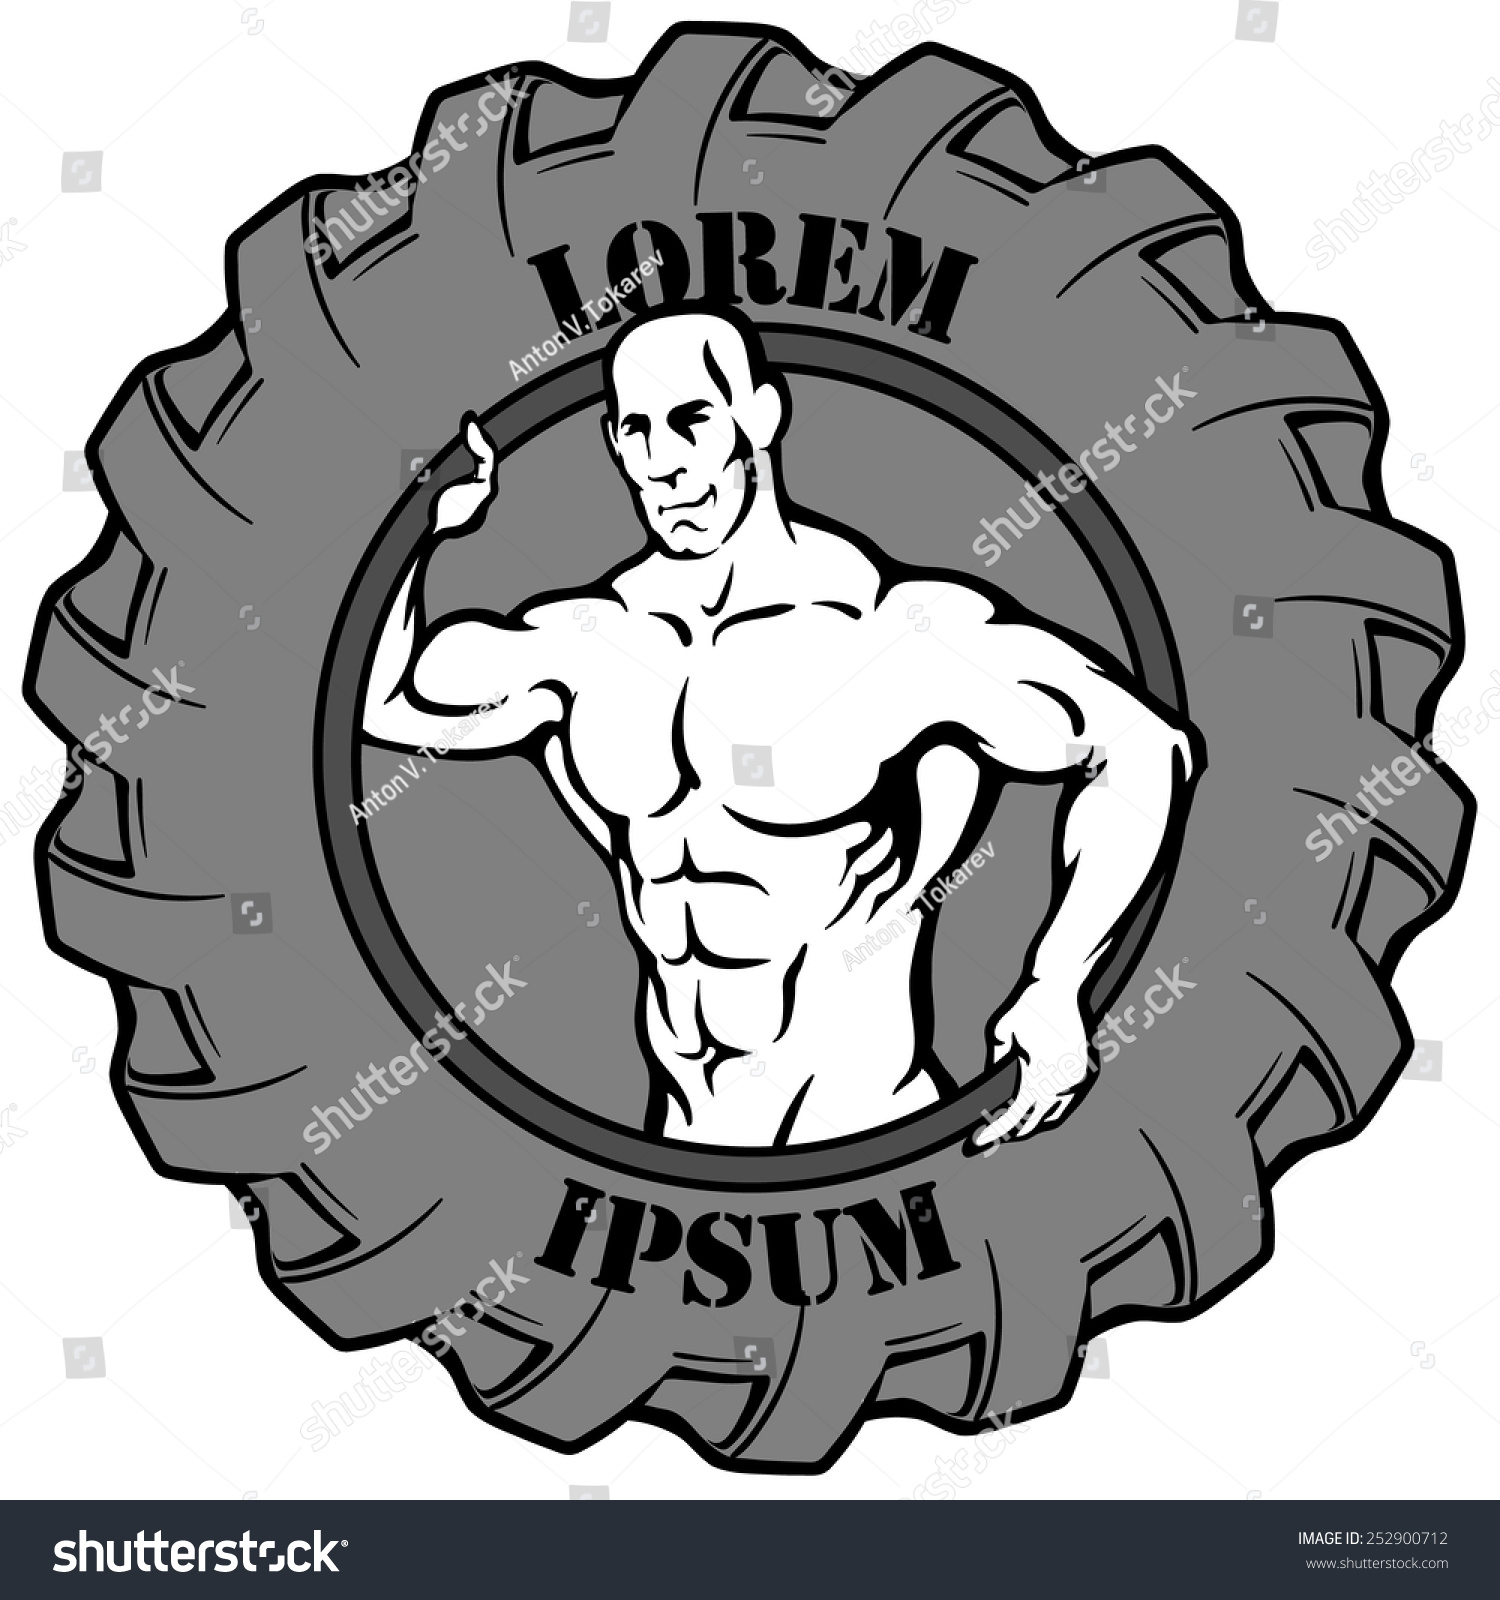 Logotype template. Muscular man's silhouette reaching out from a tire which is used for exercises in some fitness styles. EPS8 vector illustration isolated on white background. #252900712